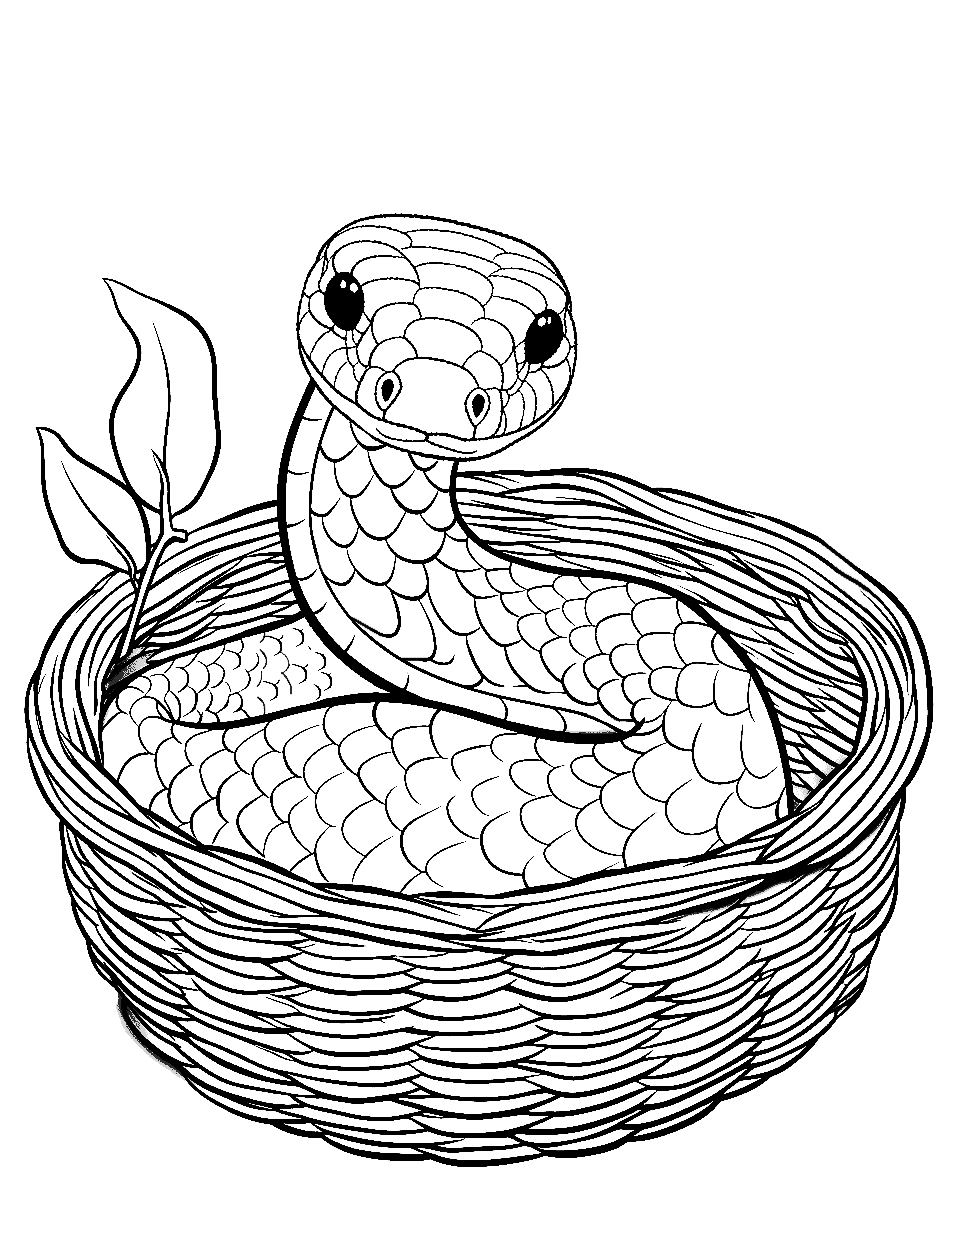 Sneaky Peek Coloring Page - A snake peeping out from a basket.